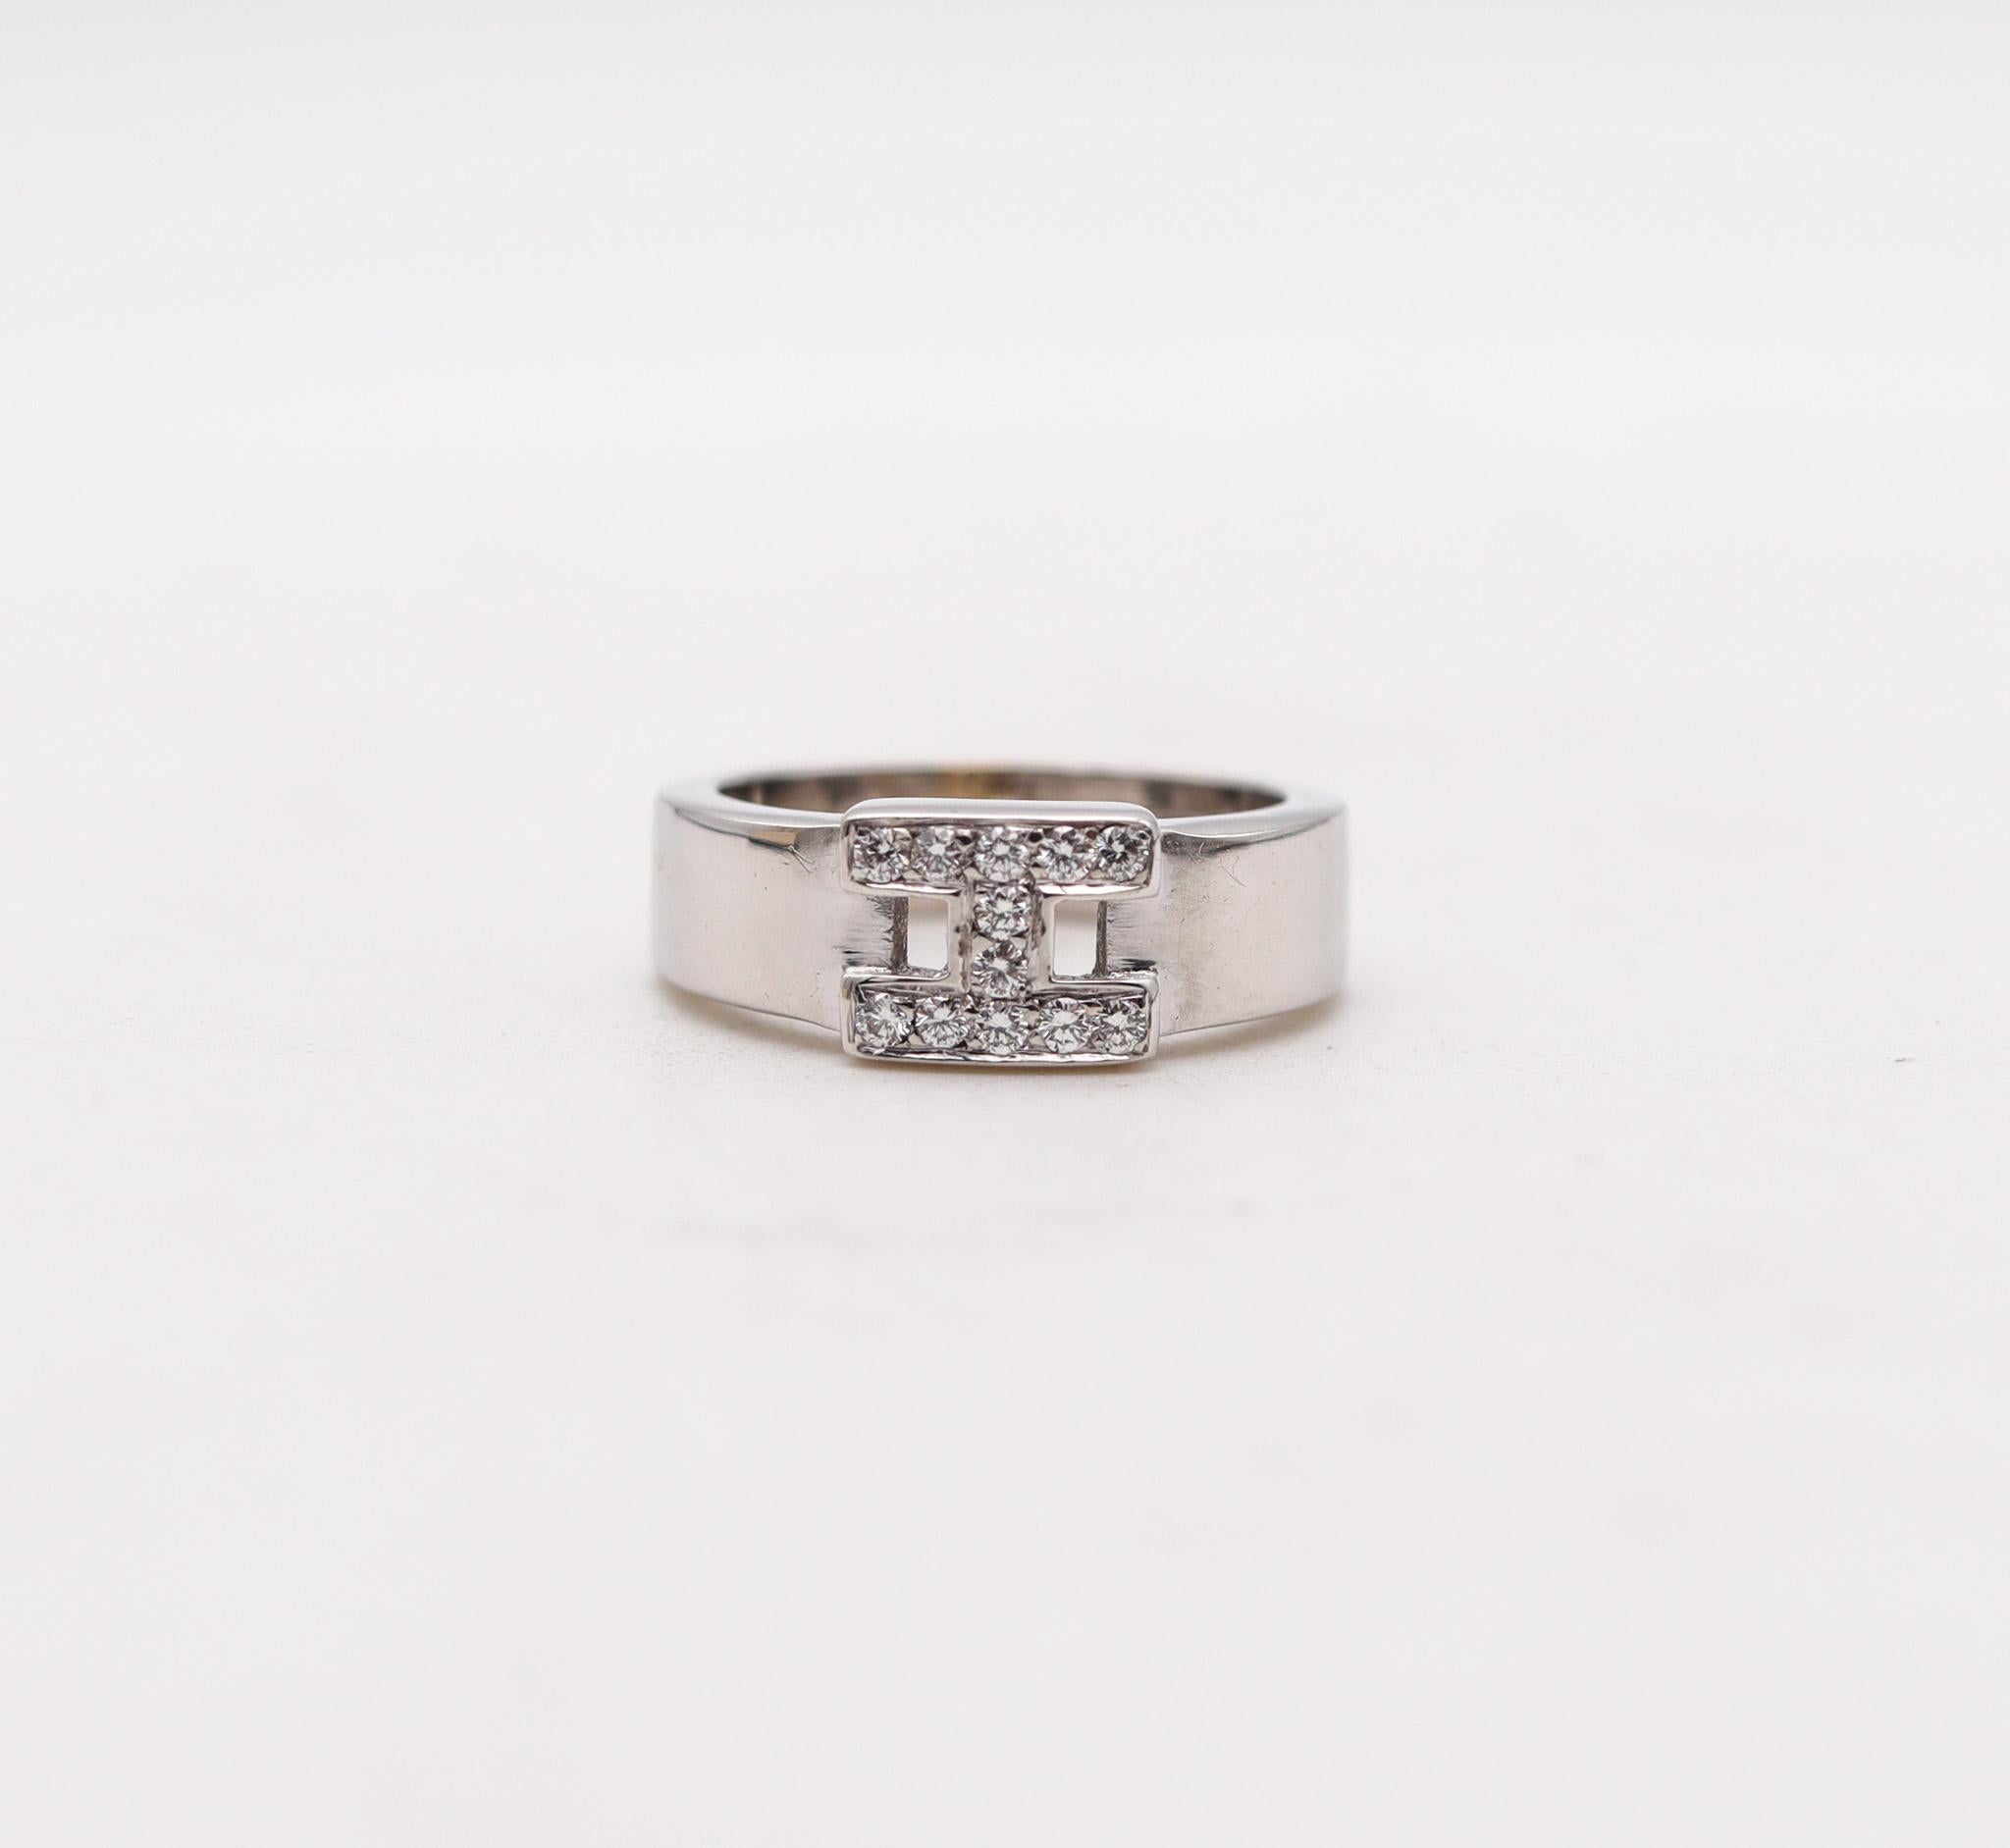 Modernist Hermes Paris H Ring Band In 18Kt White Gold With VVS Round Diamonds For Sale